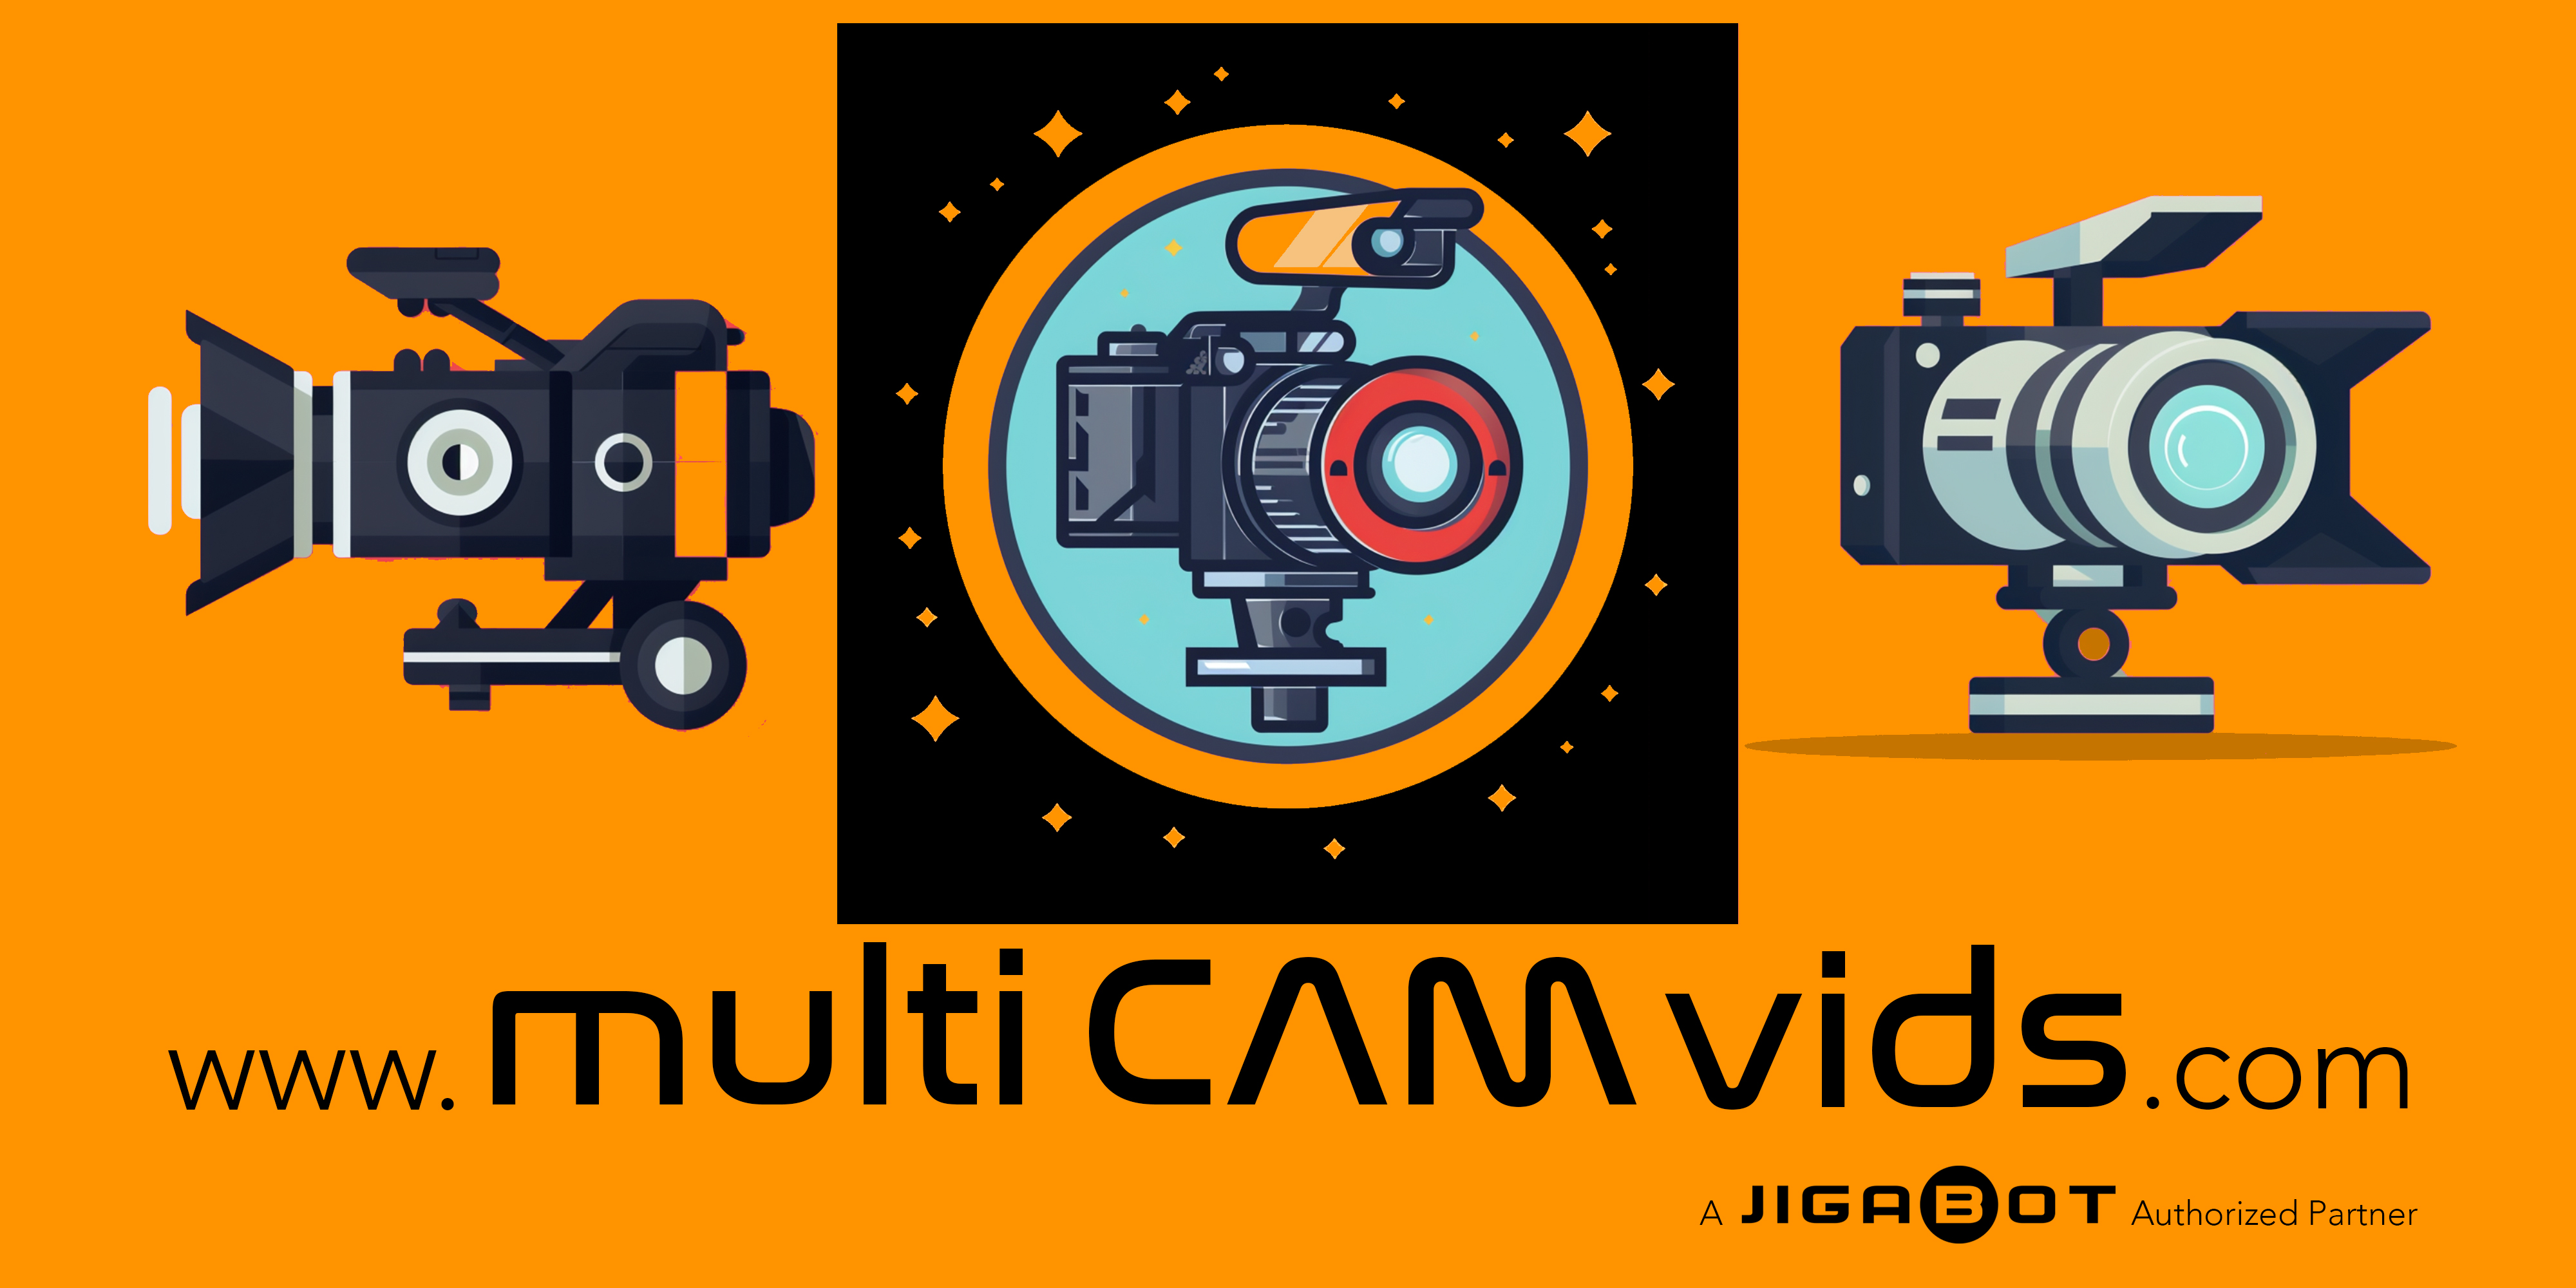 MultiCAMvids logo showing a stylized camera shutter in orange and gray colors